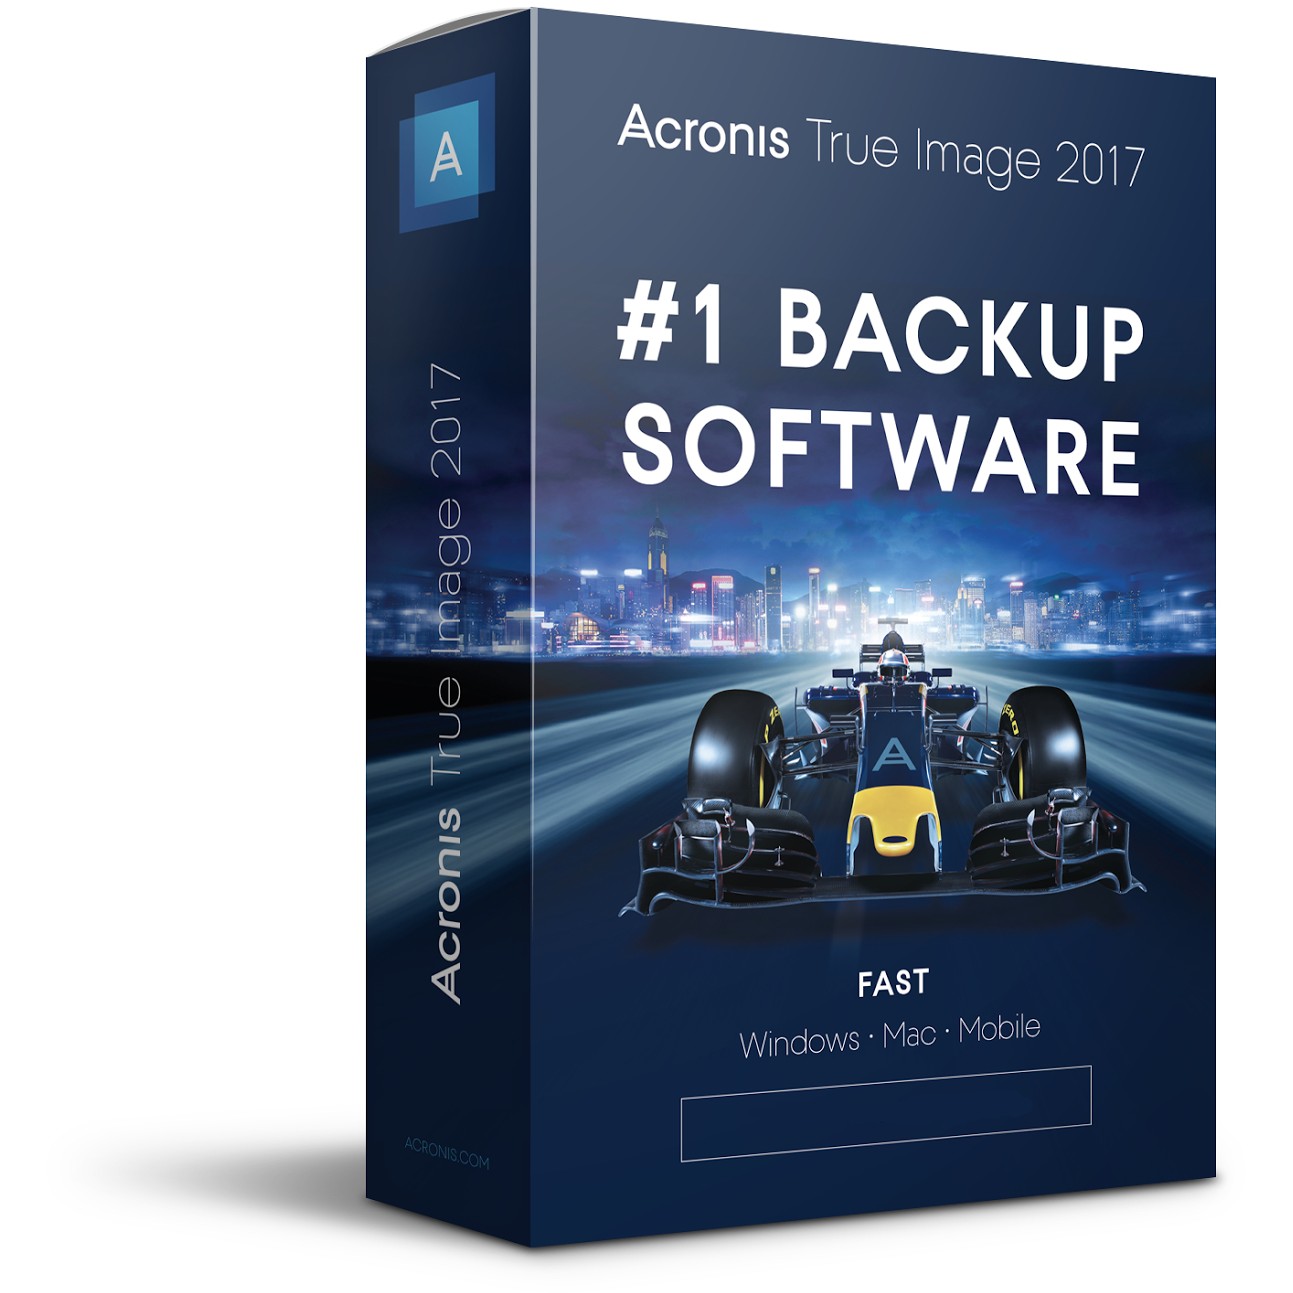 Acronis Cyber Protect Home Office Advanced - 3 Computer + 50 GB Cloud Storage - 1 year subscription - ESD-DownloadESD